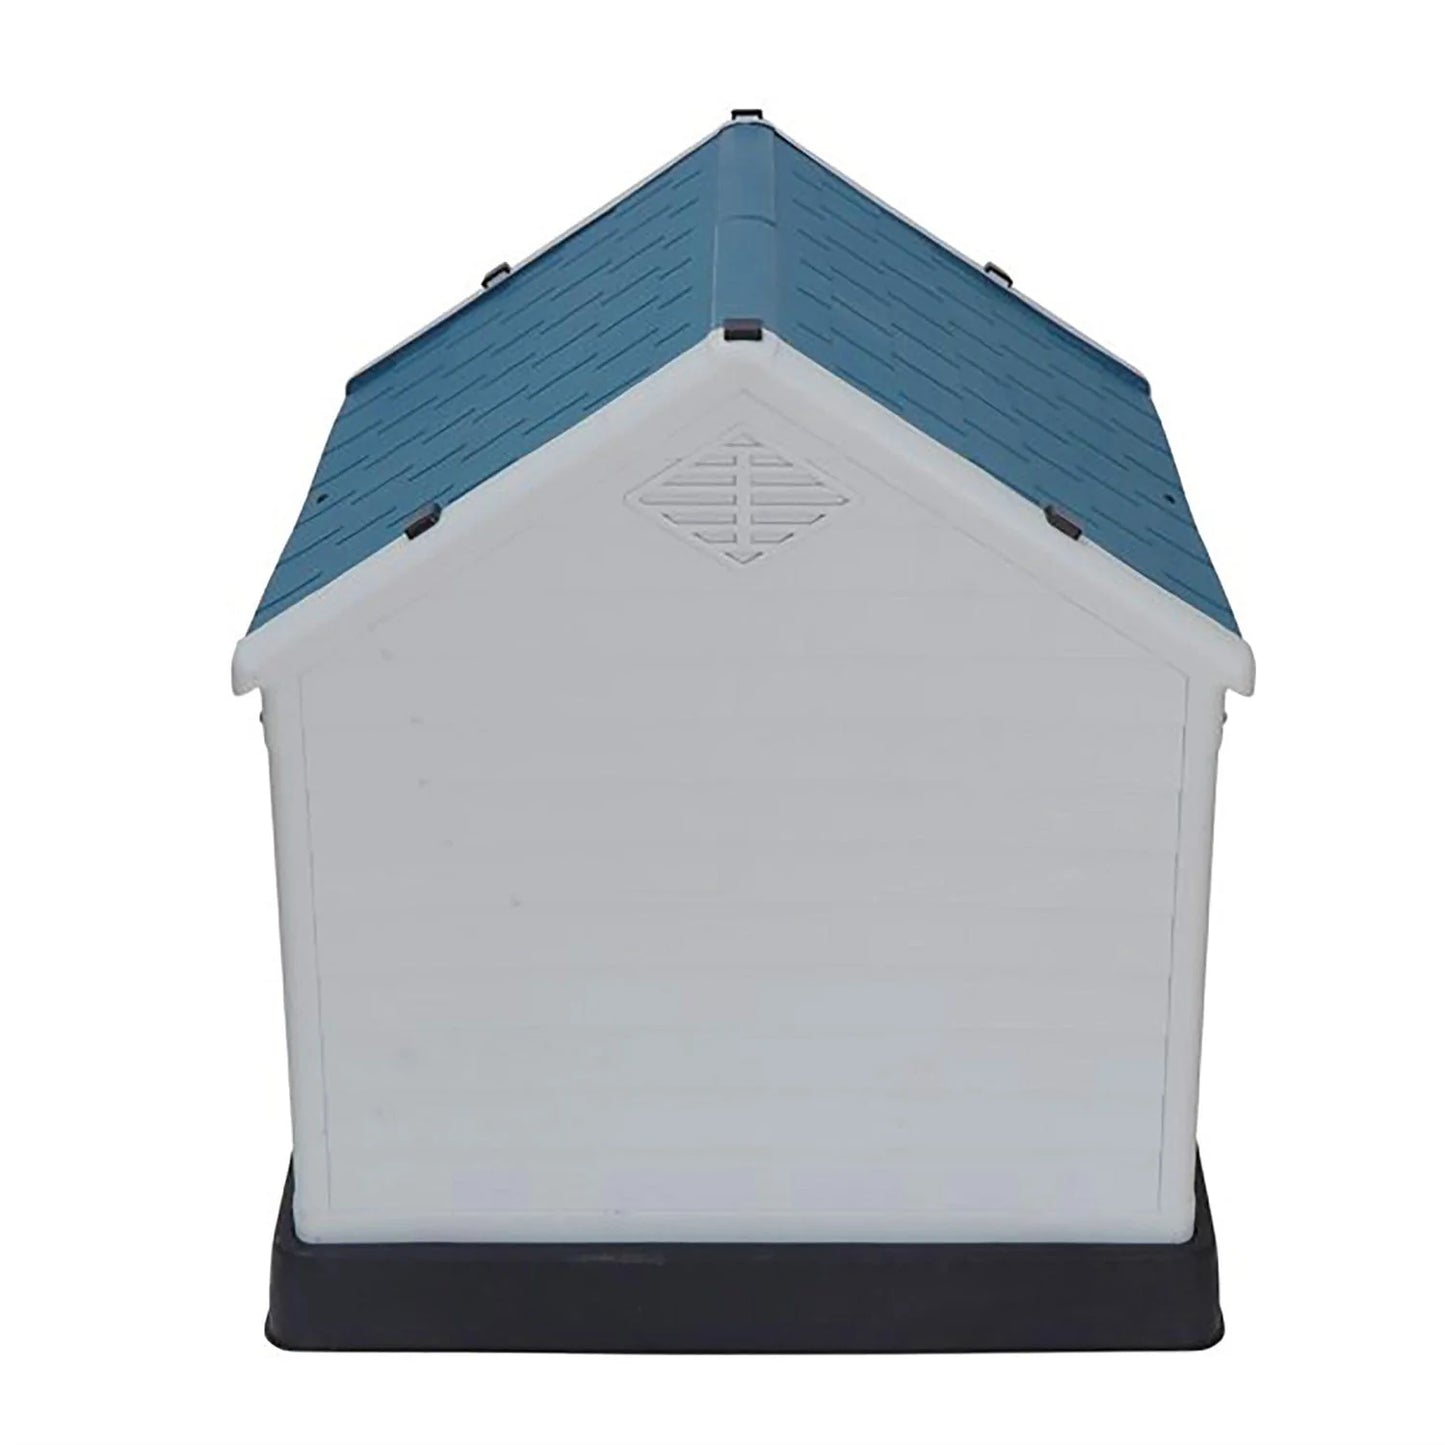 ZENY Plastic Indoor Outdoor Dog House Medium Pet Doghouse White, Blue Roof